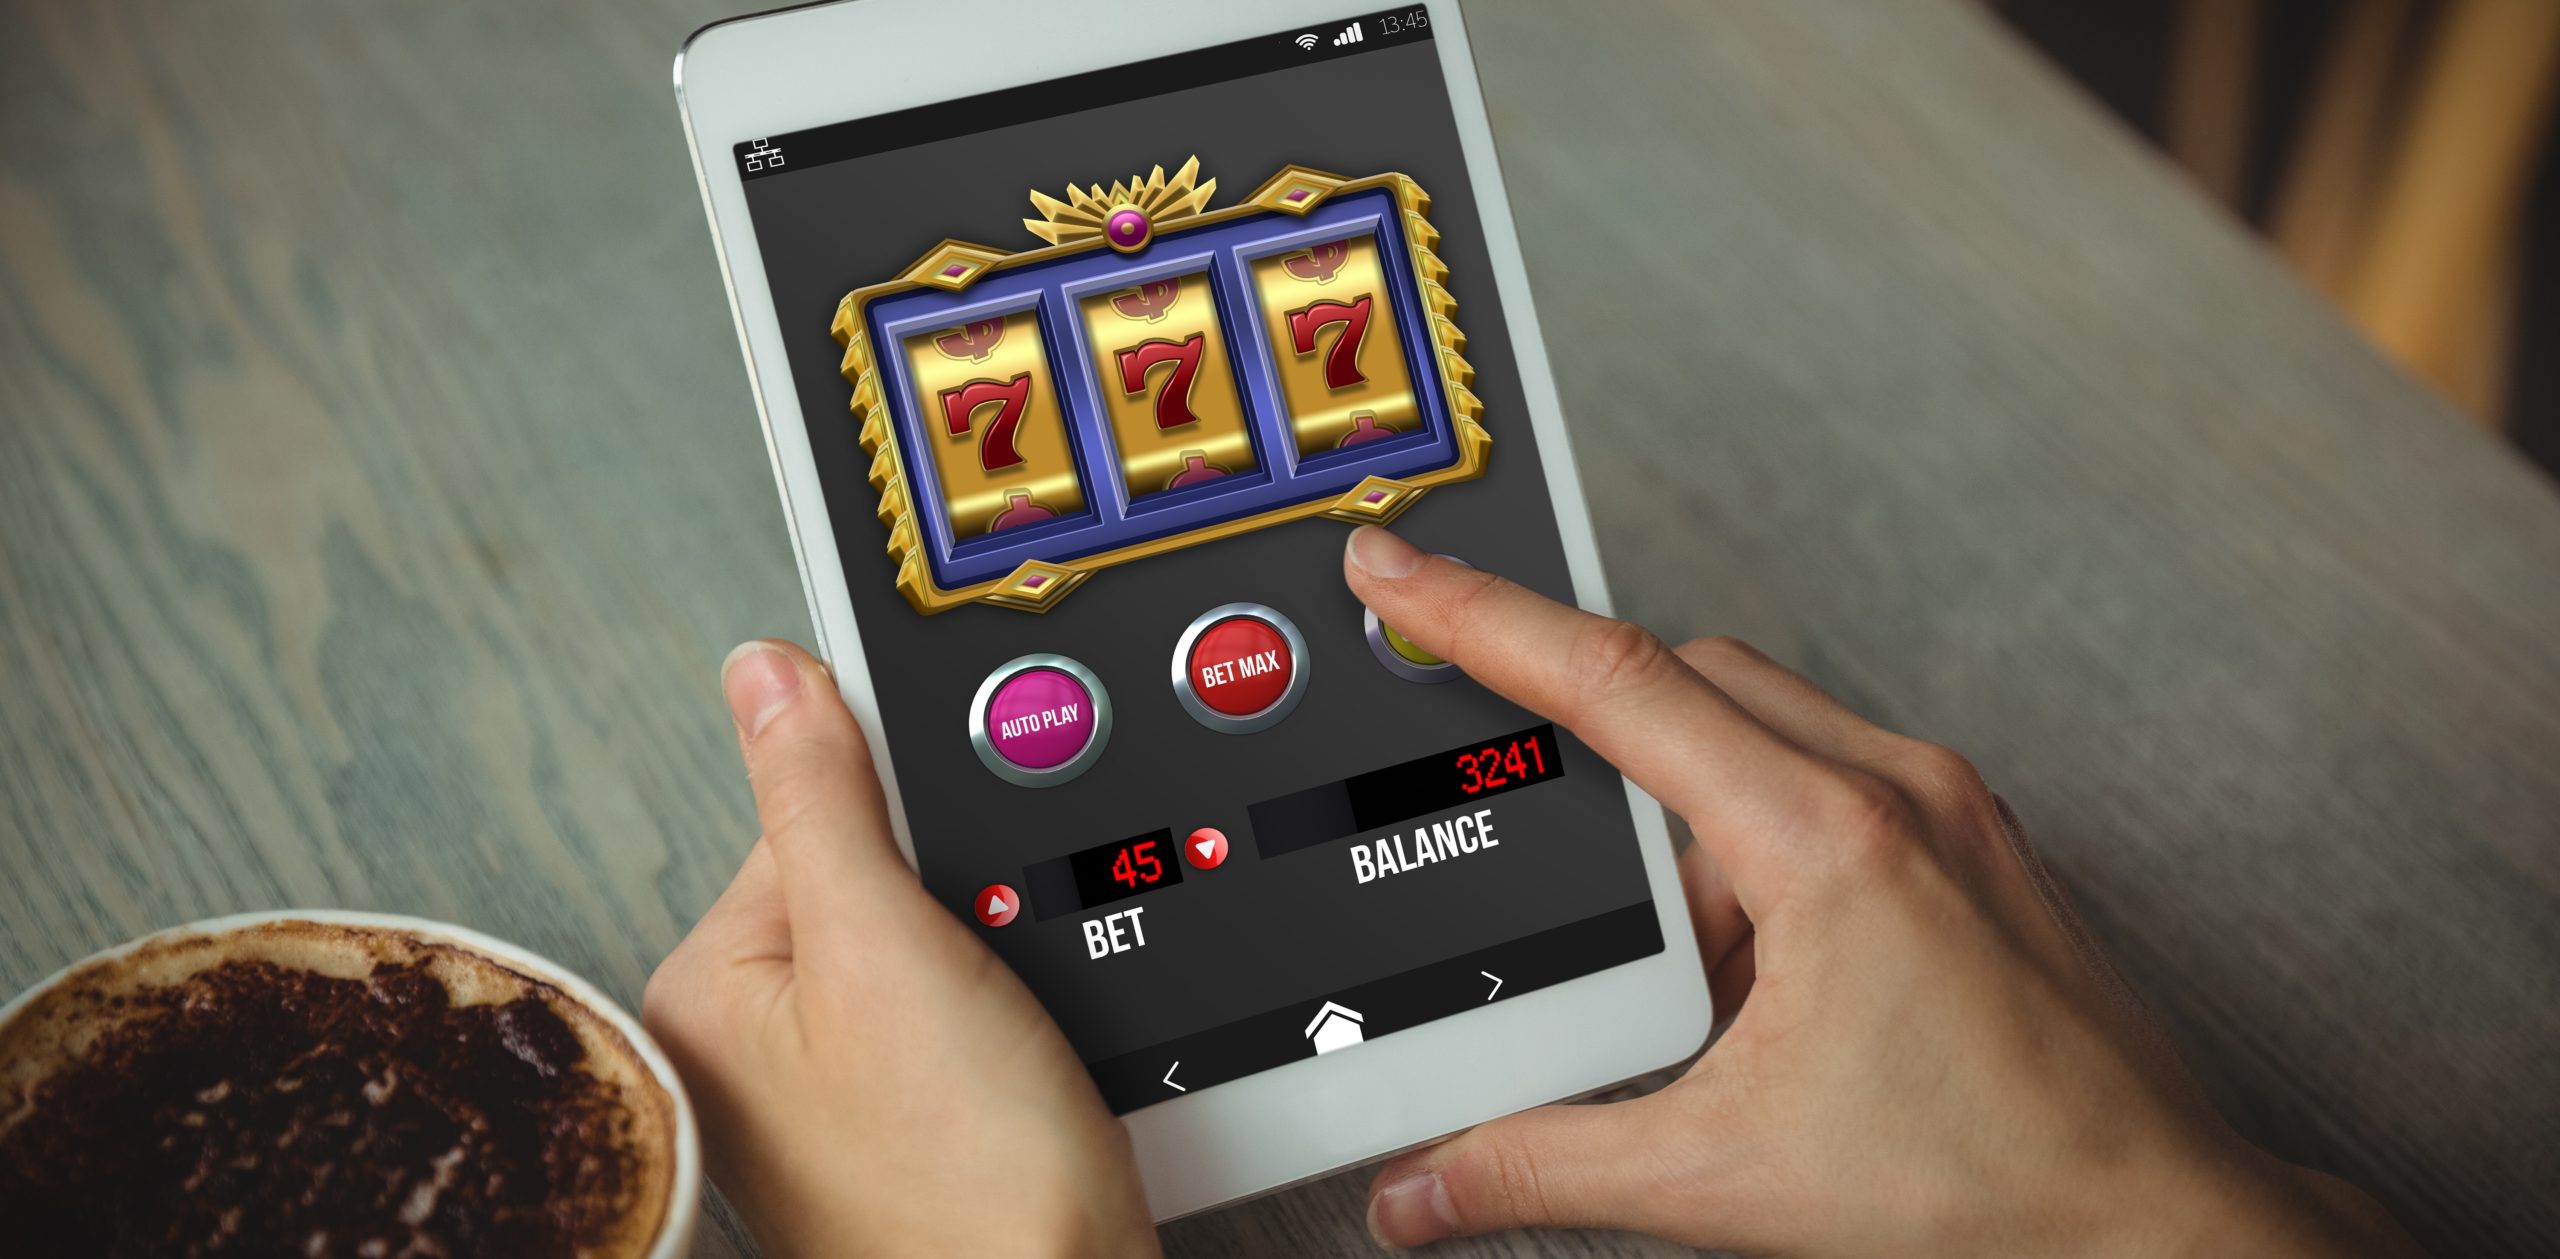 Casino Apps Lead To New Gambling Warning